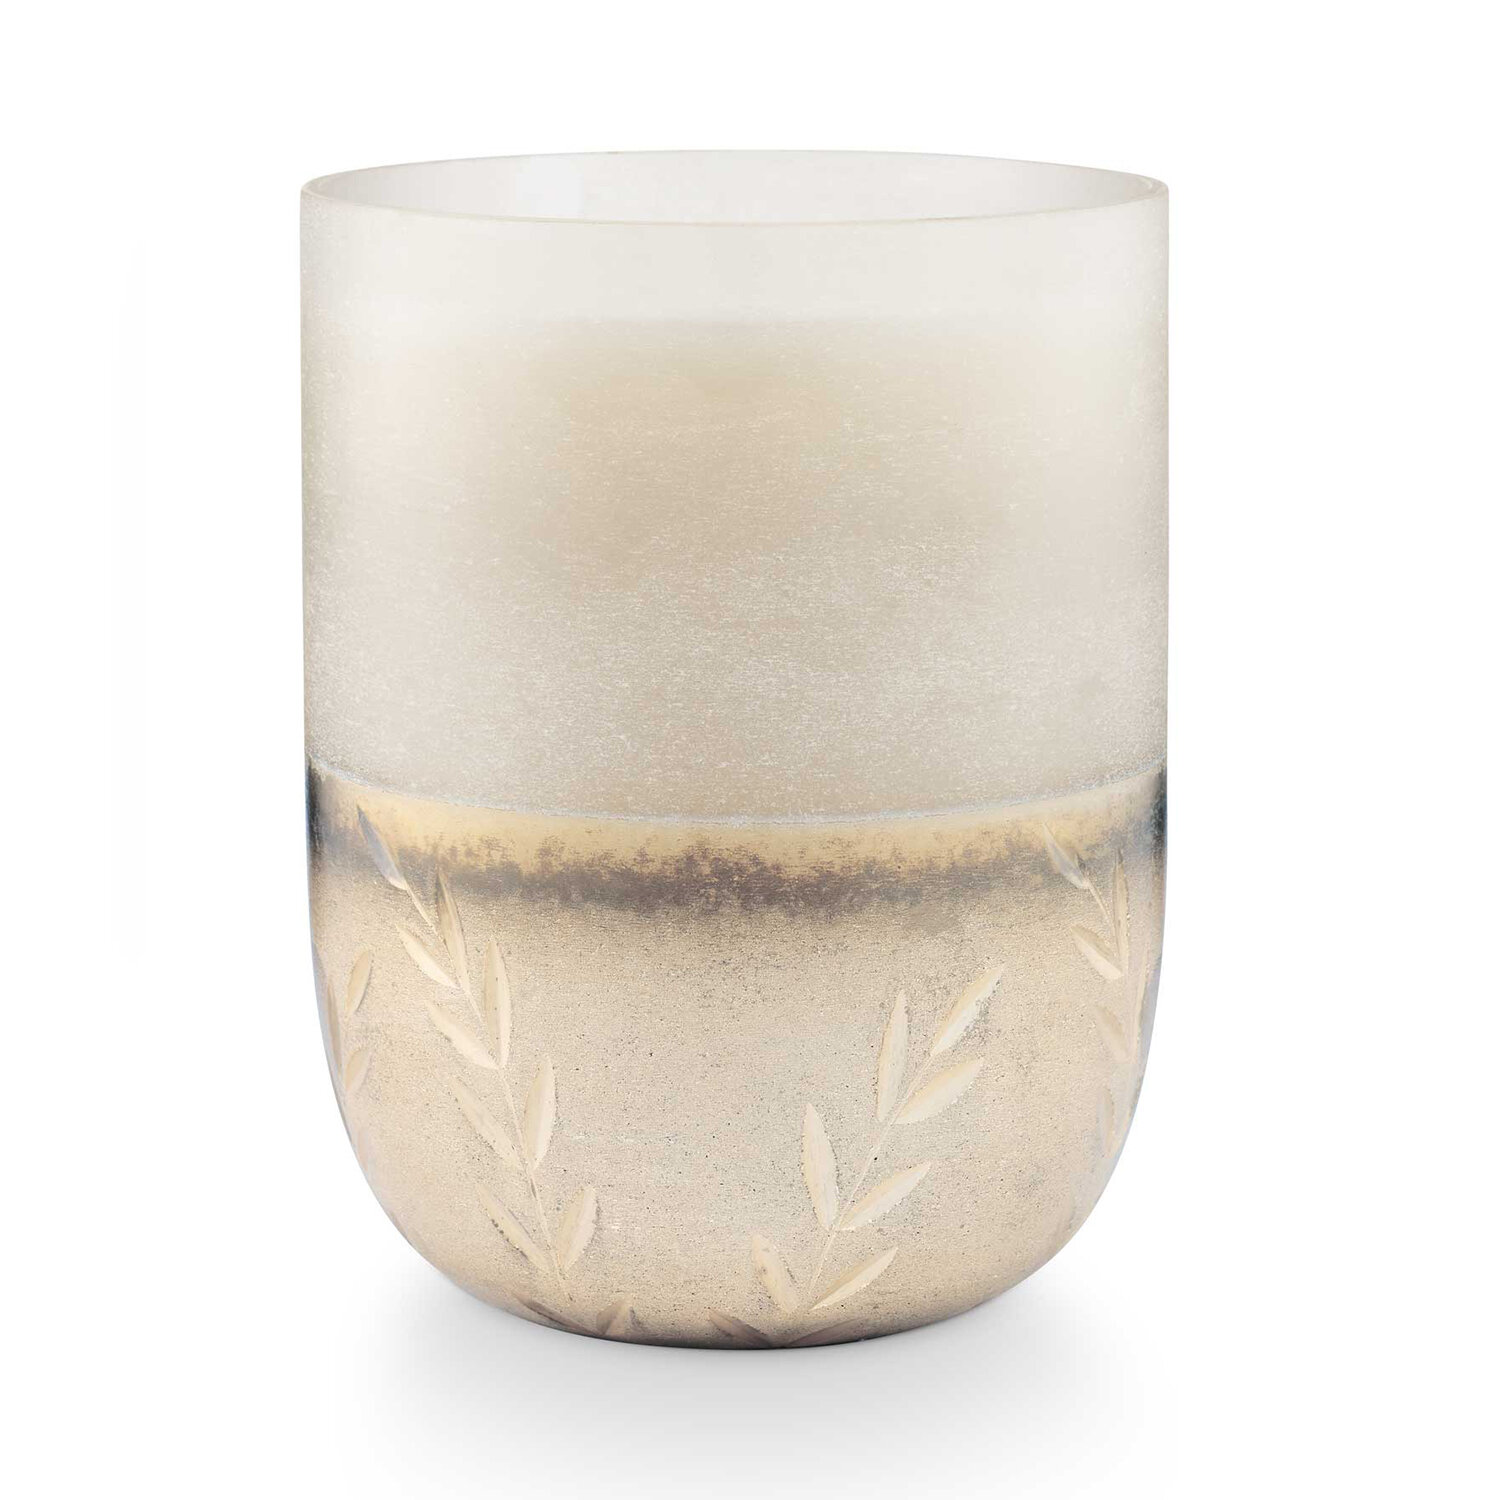 Illume Large Balsam and Cedar Holiday Scented Candle + Reviews